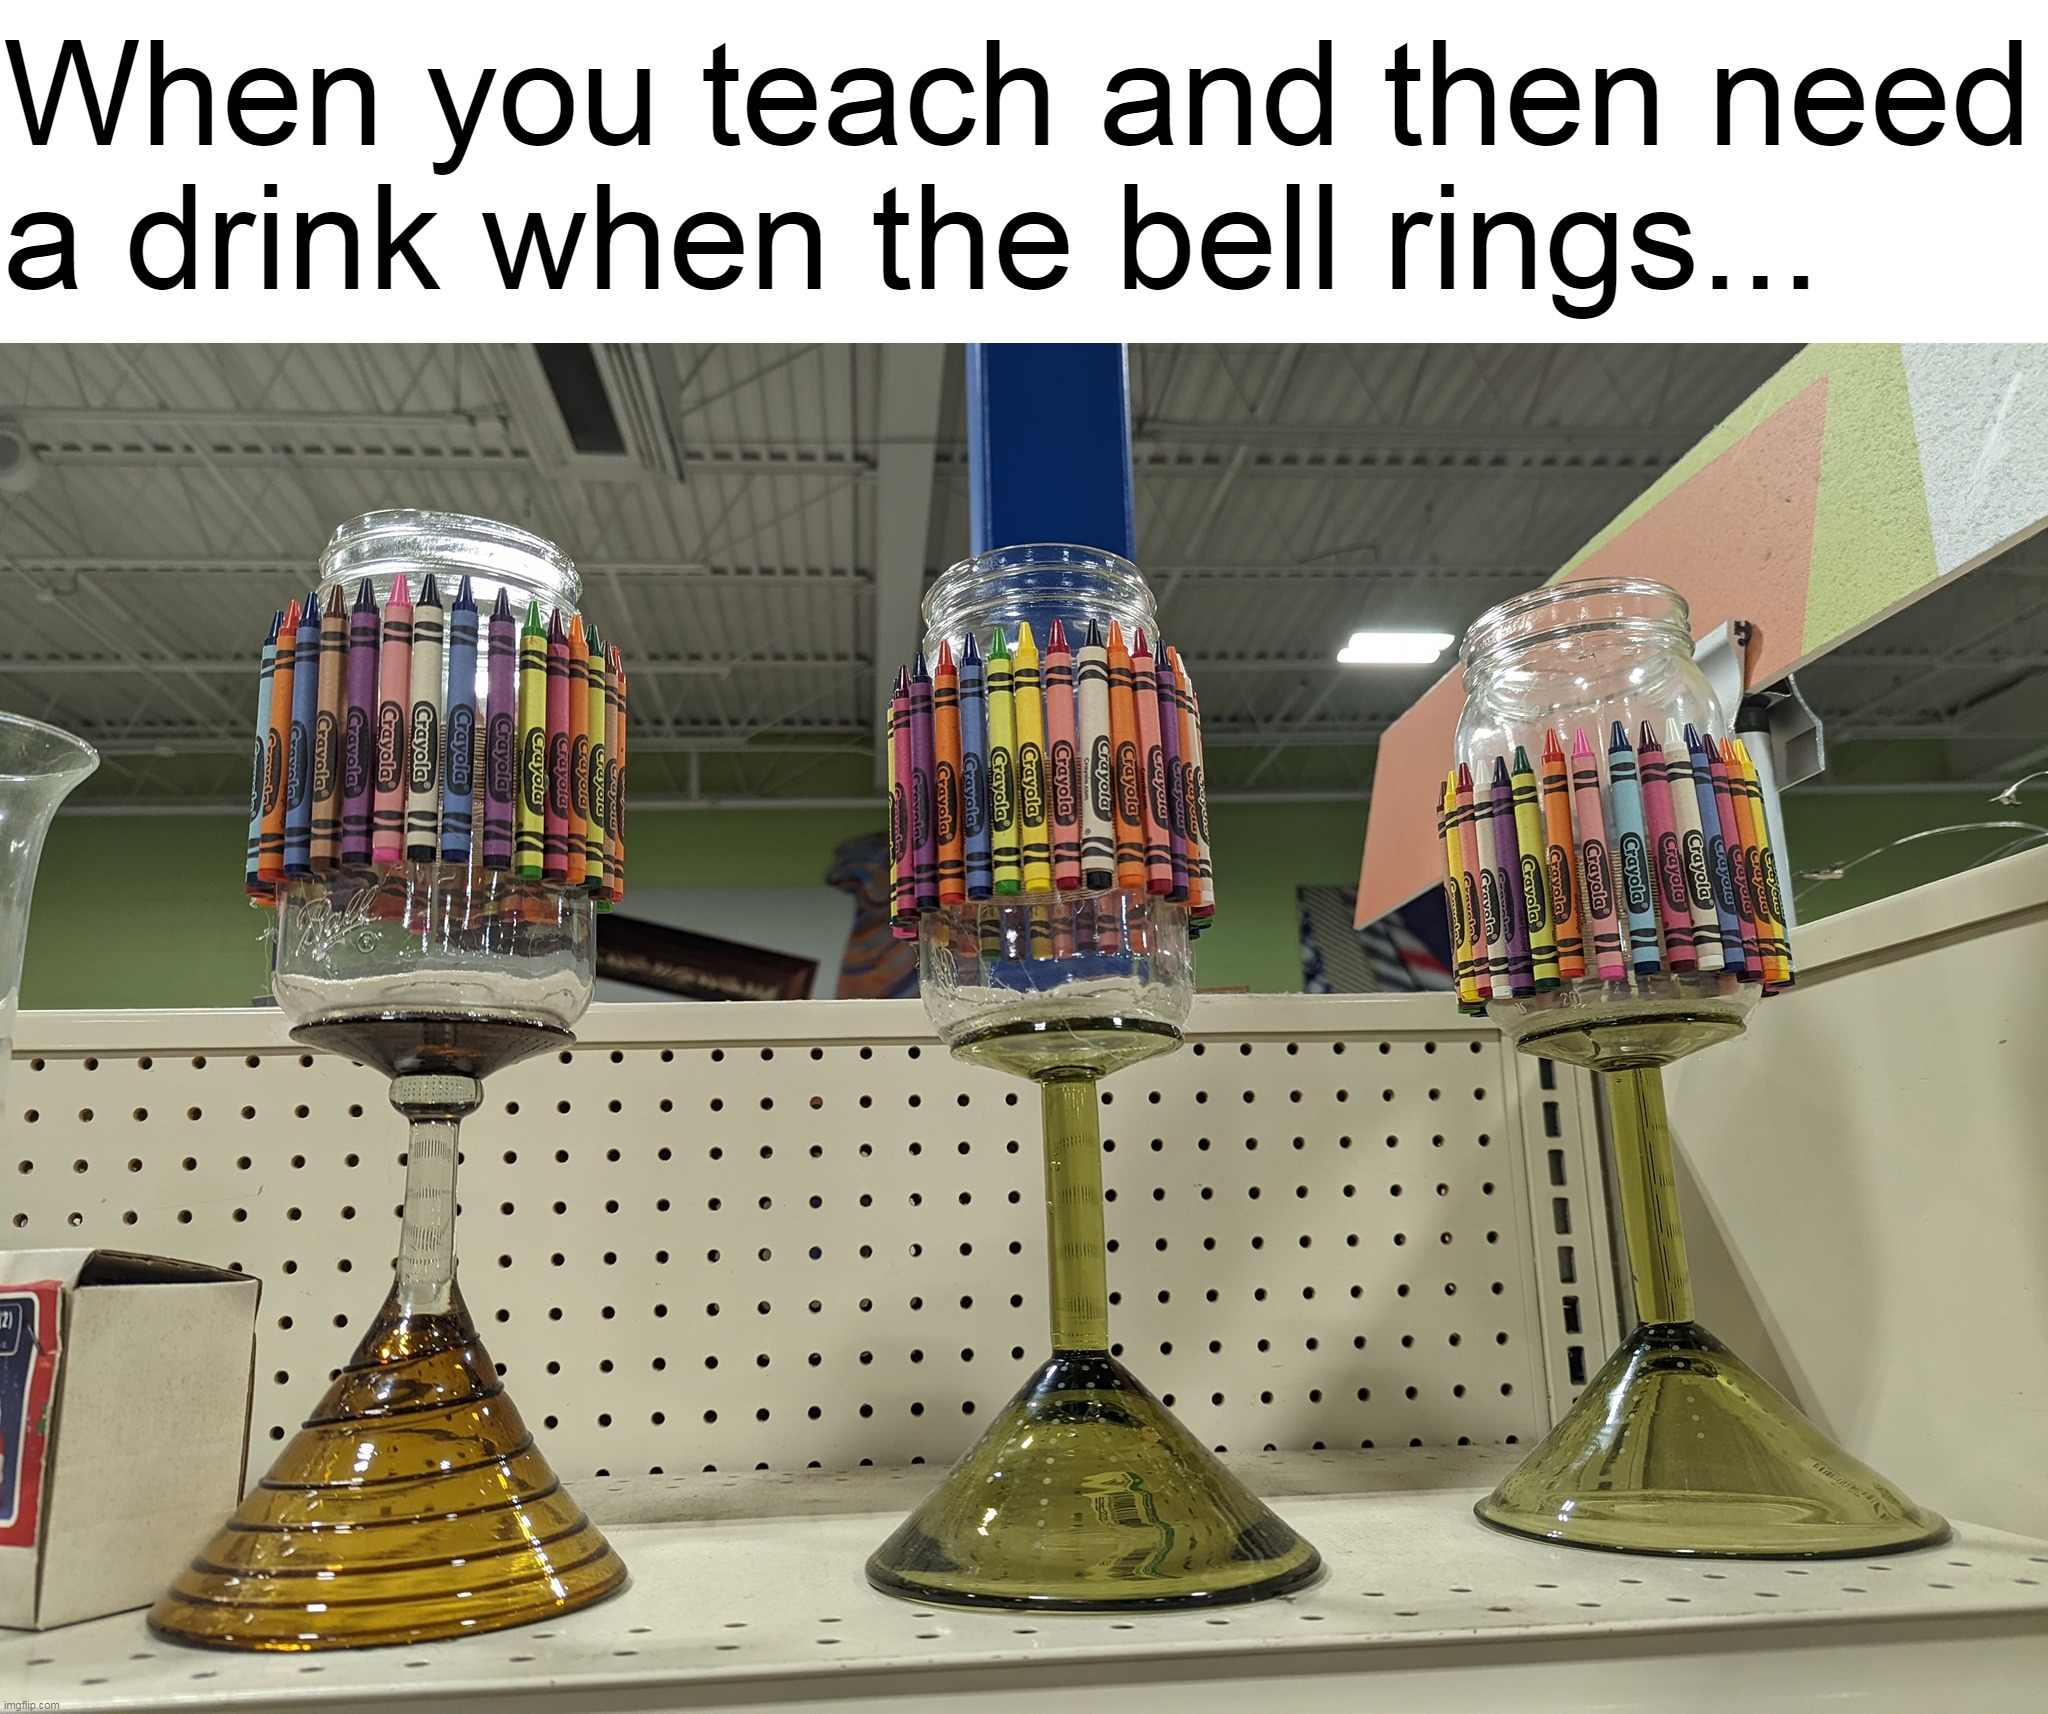 Conjugated More Than Verbs |  When you teach and then need a drink when the bell rings... | image tagged in meme,memes,humor | made w/ Imgflip meme maker